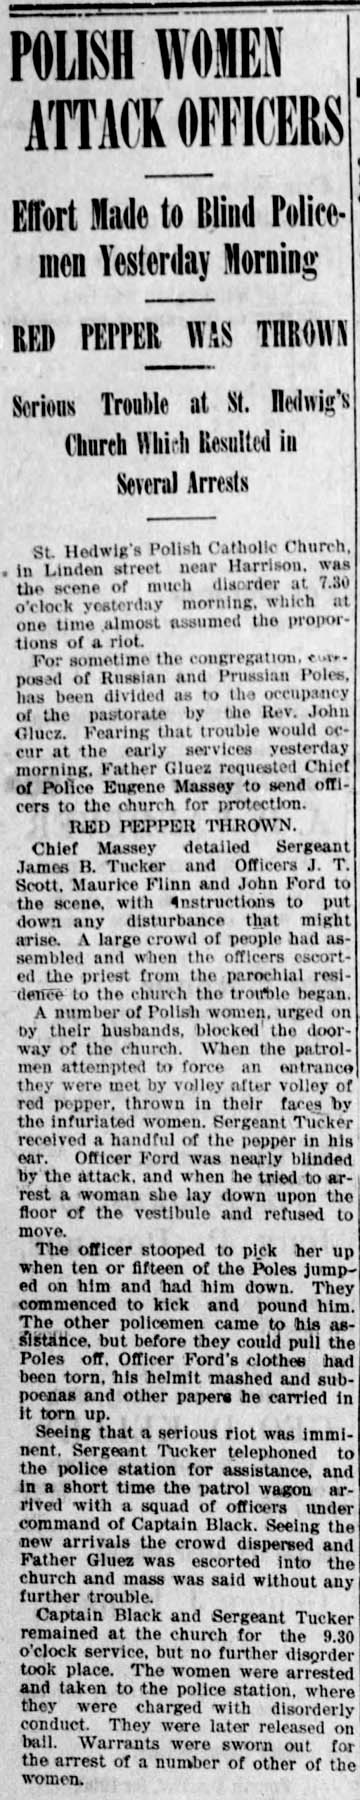 ST HEDWIGNS CHURCH POLISH WOMEN ATTACK COPS ARTICLE IN WILMINGTON DELAWARE AUGUST 1900 - A